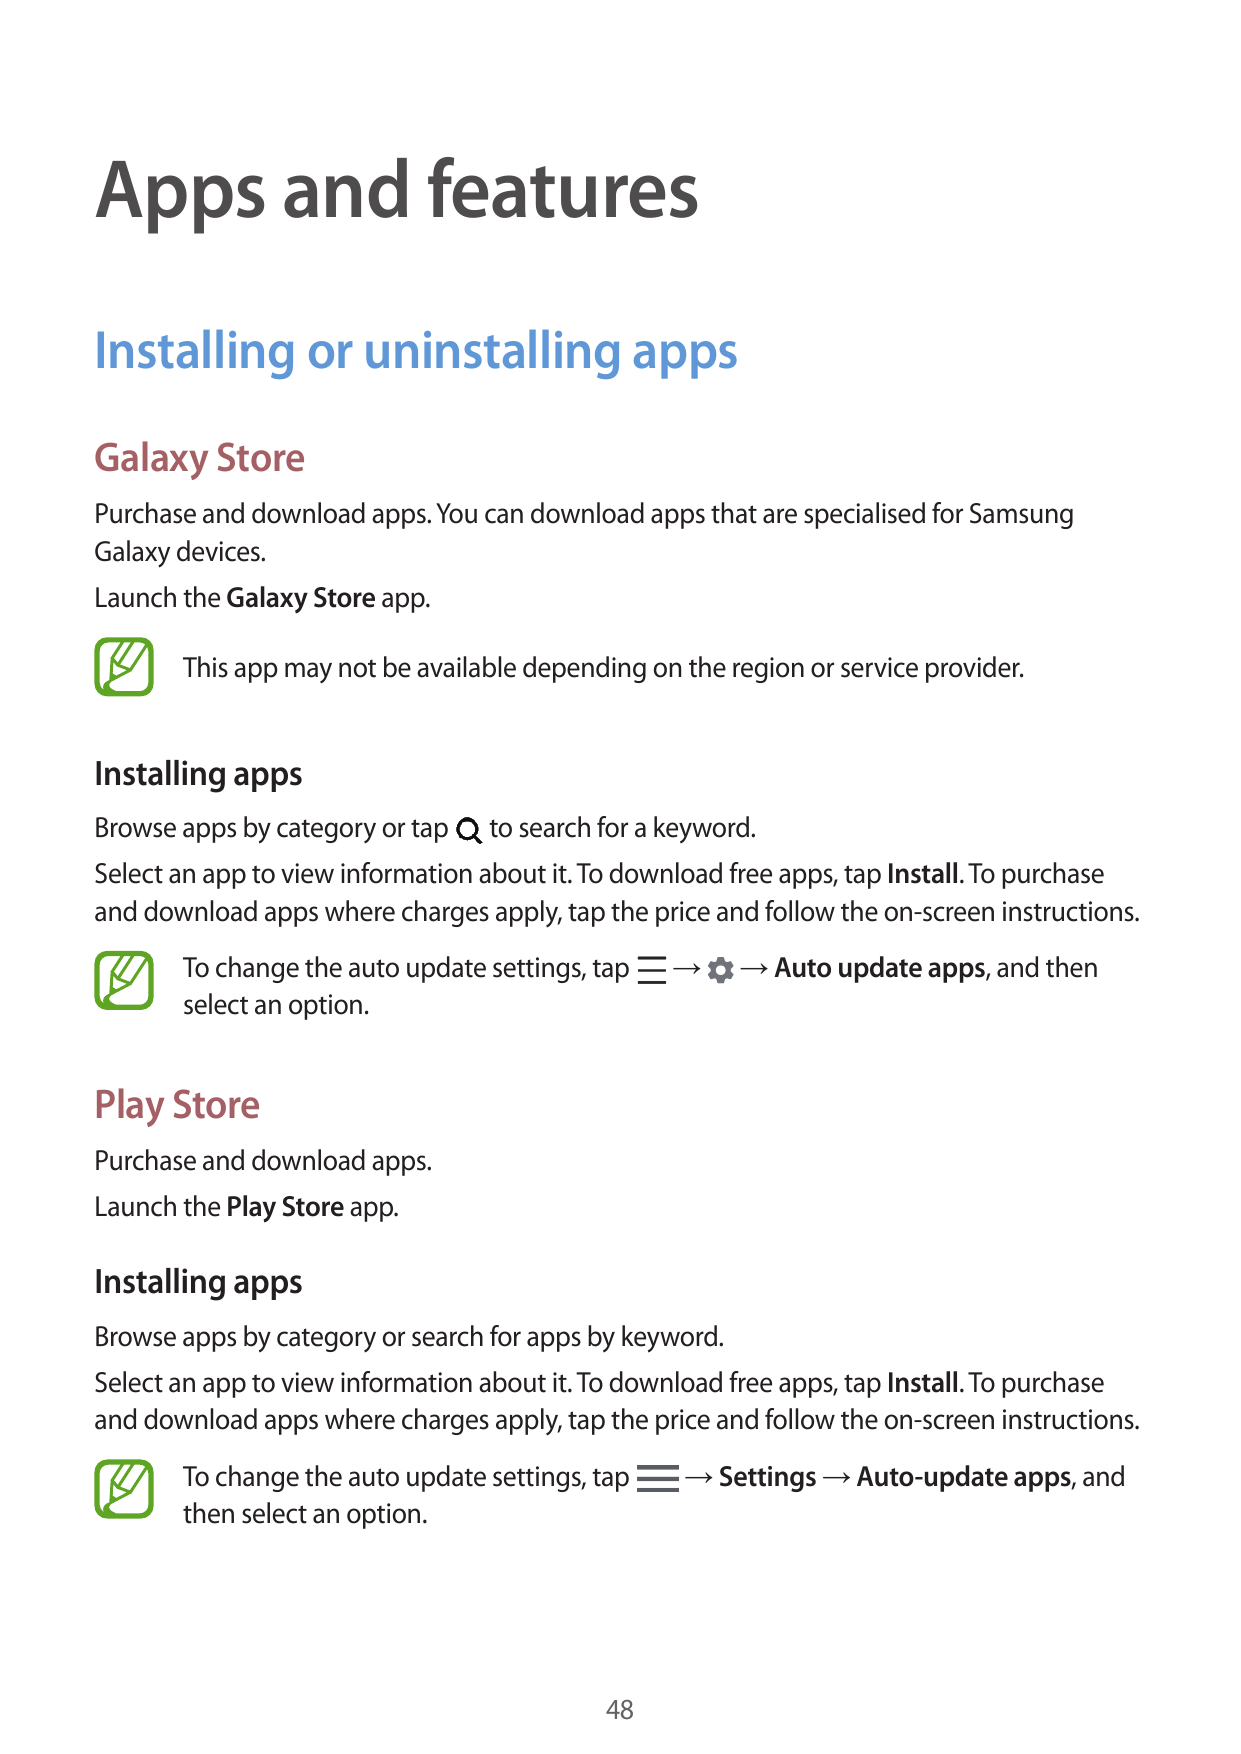 Apps and featuresInstalling or uninstalling appsGalaxy StorePurchase and download apps. You can download apps that are specialis